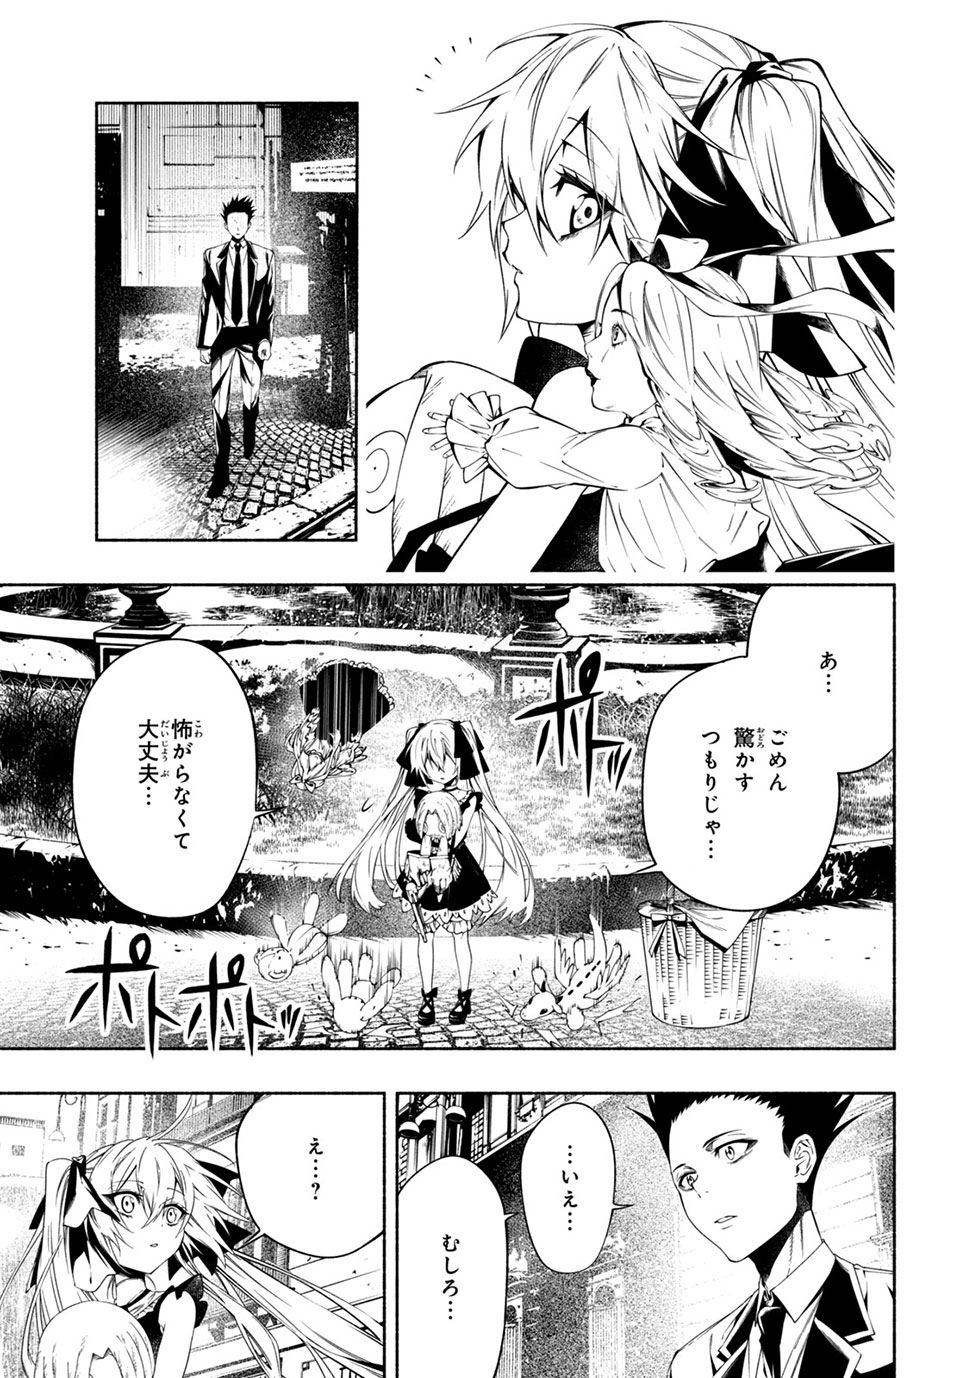 Shaman King: and a garden 第12.4話 - Page 4